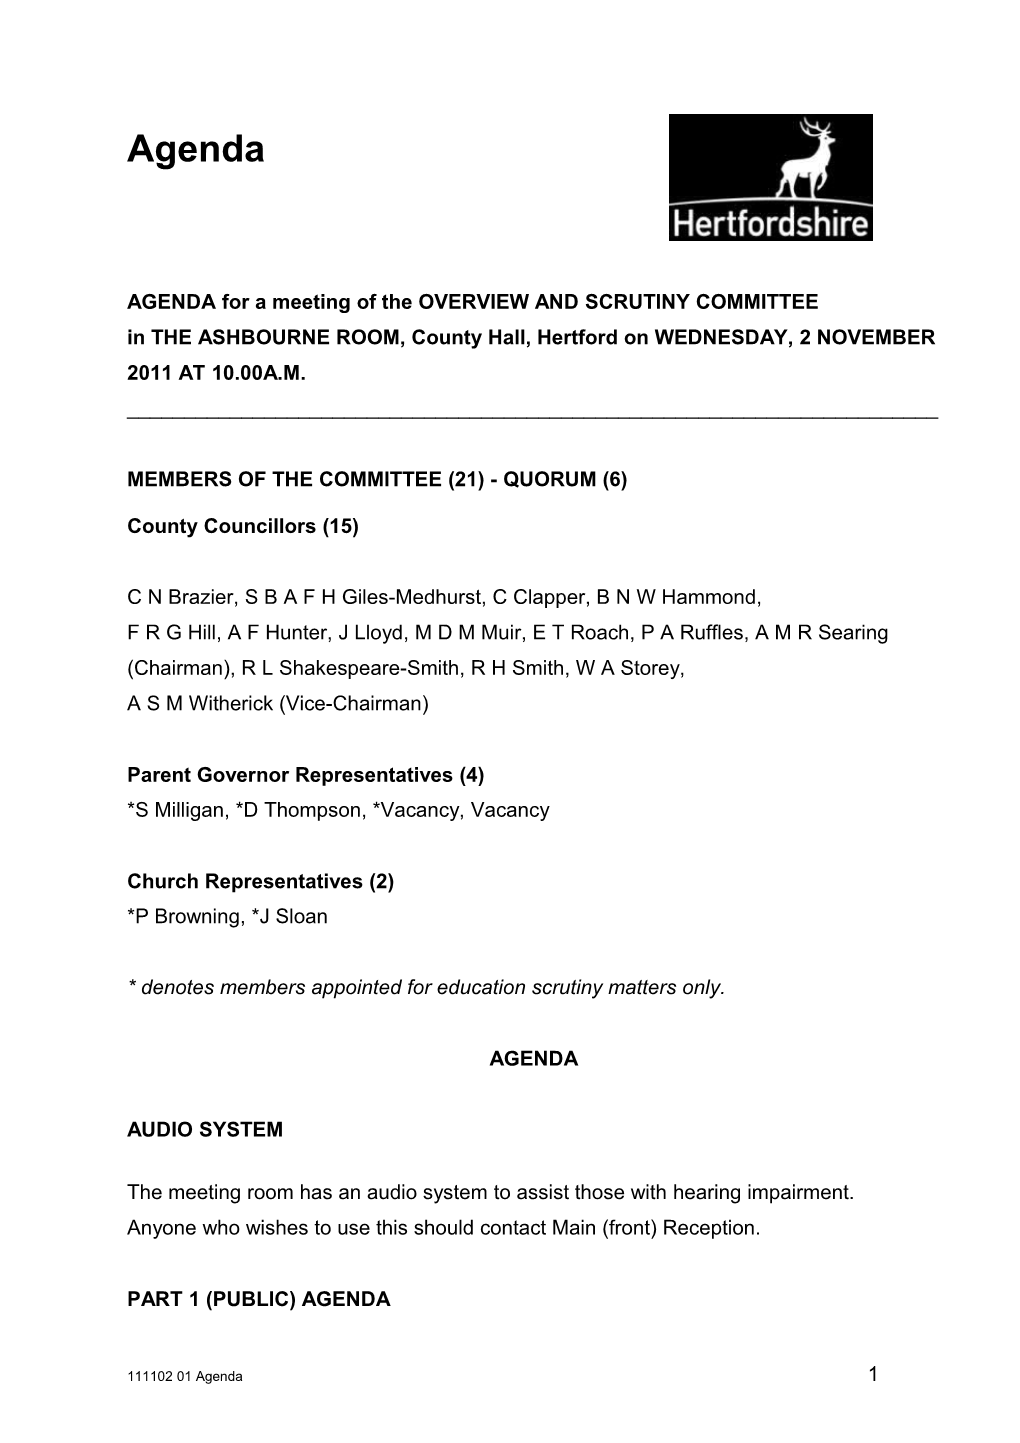 AGENDA for a Meeting of the OVERVIEW & SCRUTINY COMMITTEE in The